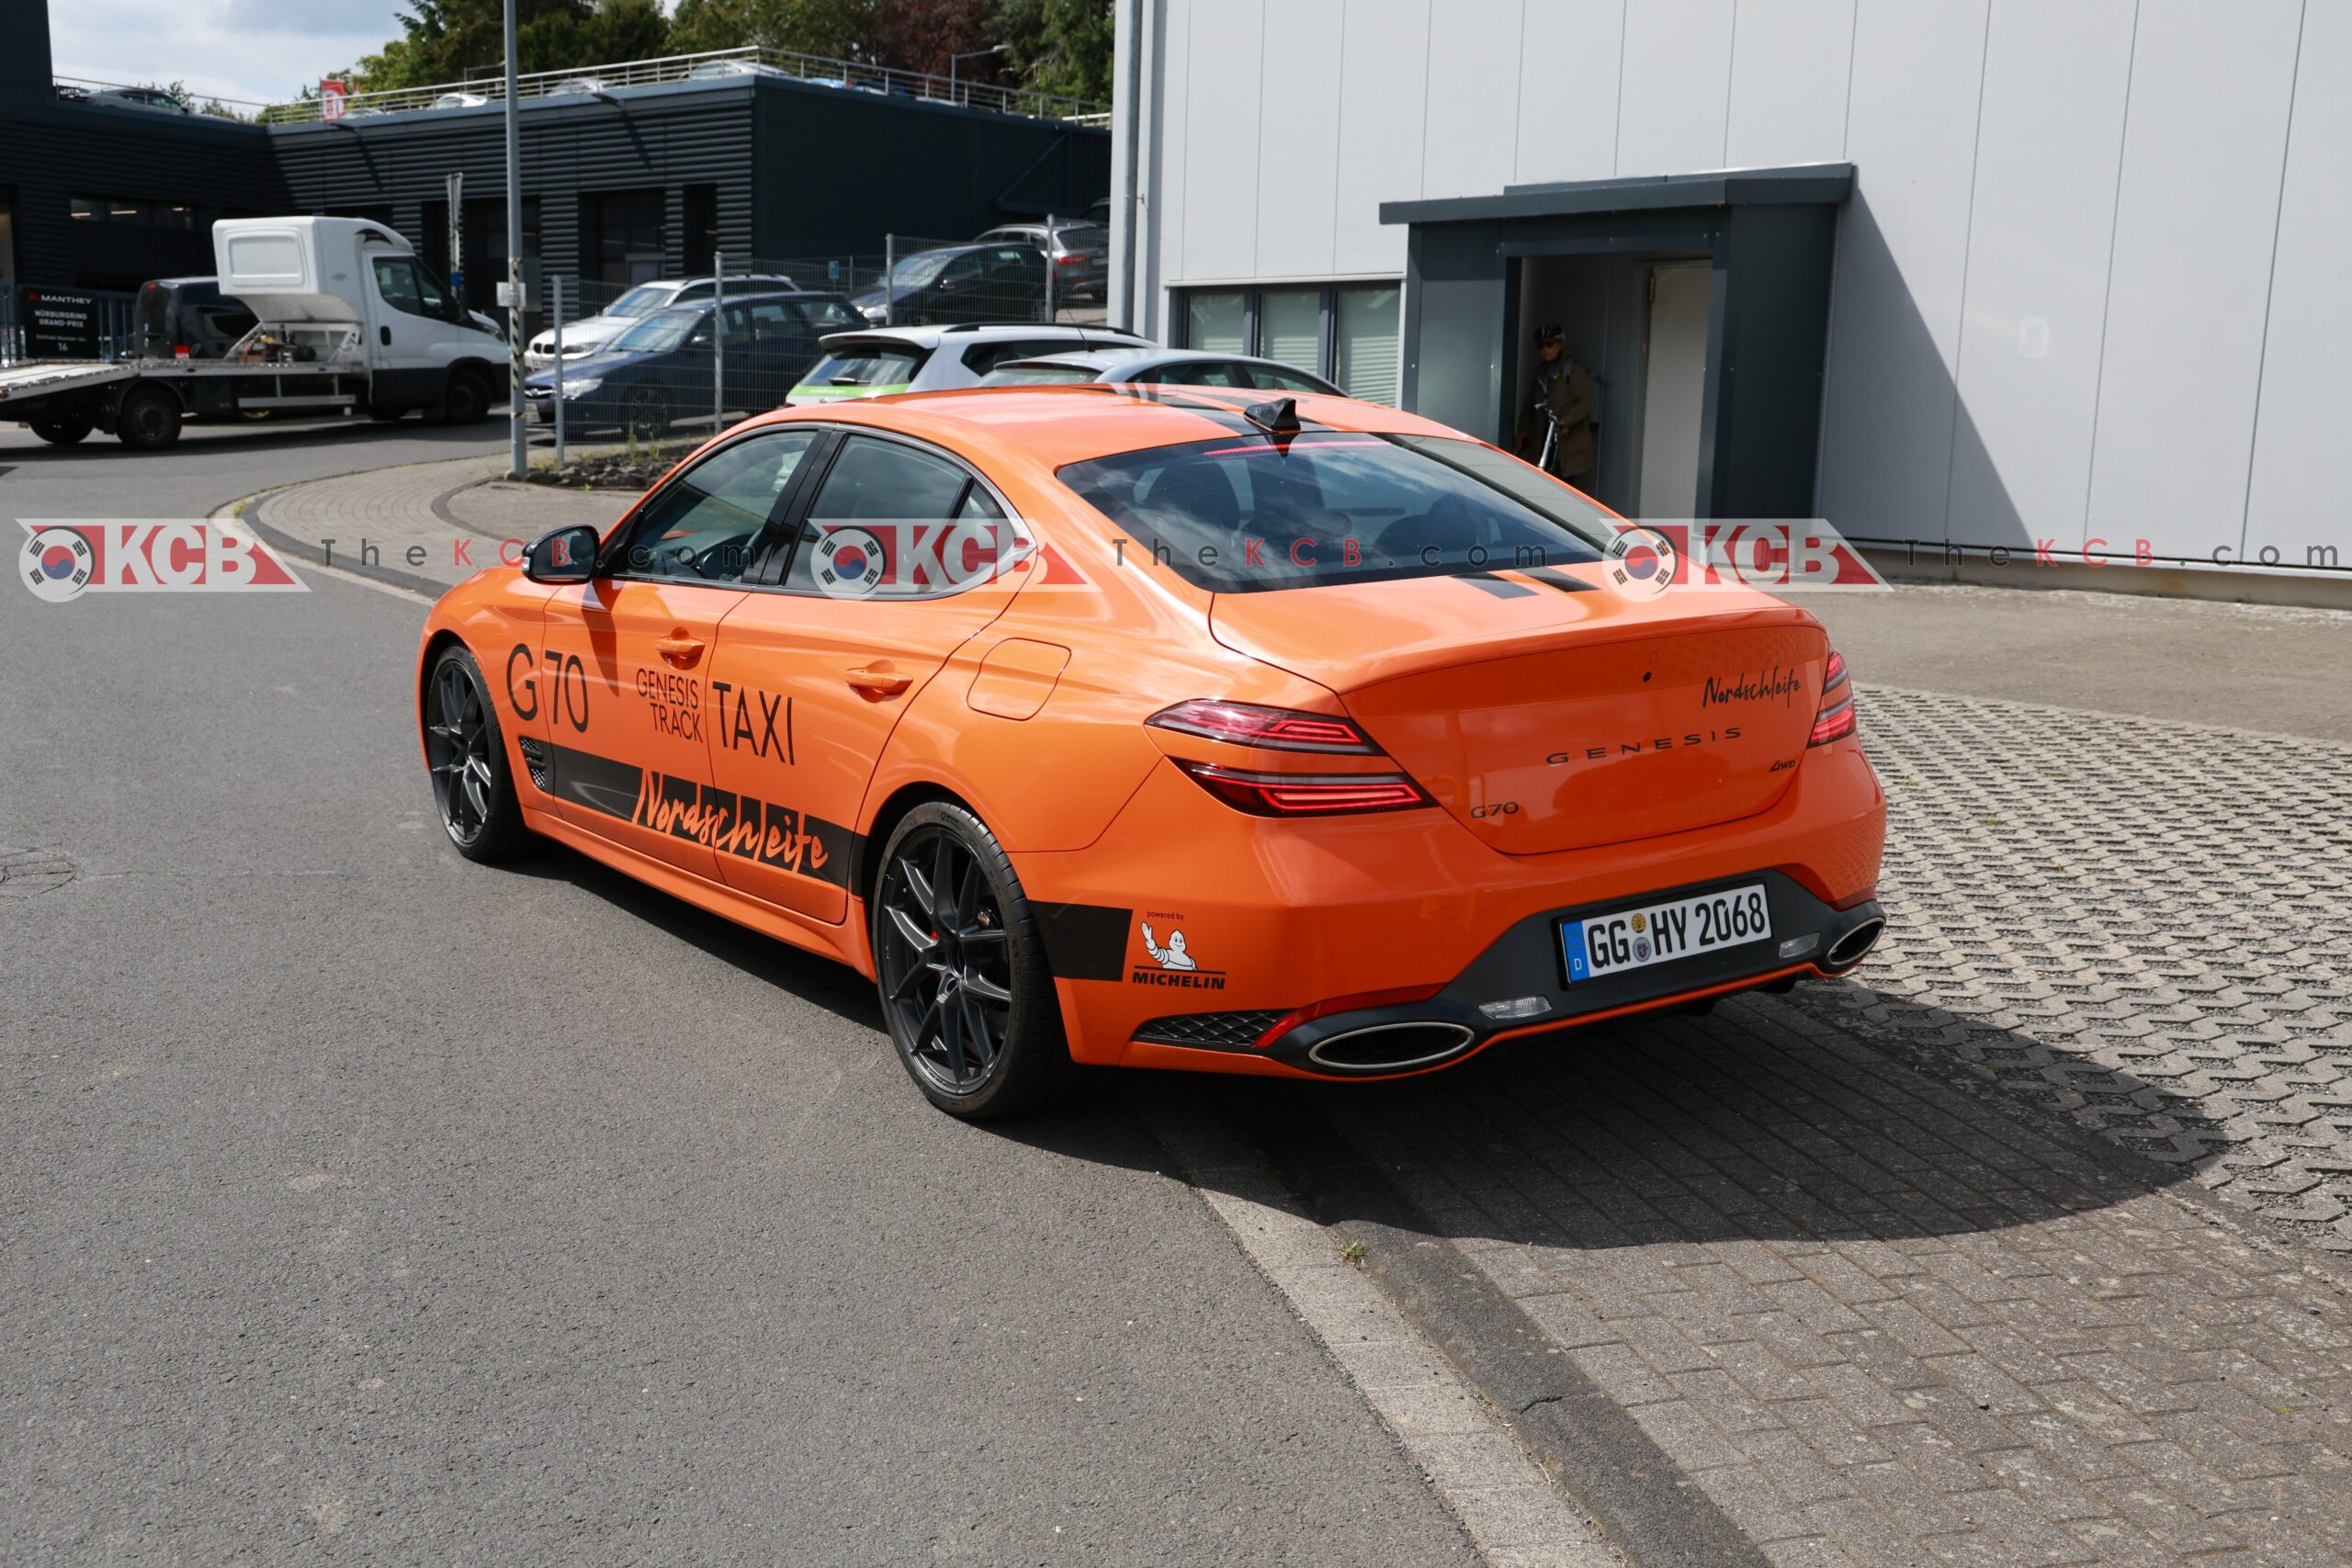 genesis g70 track taxi nordschleife 6